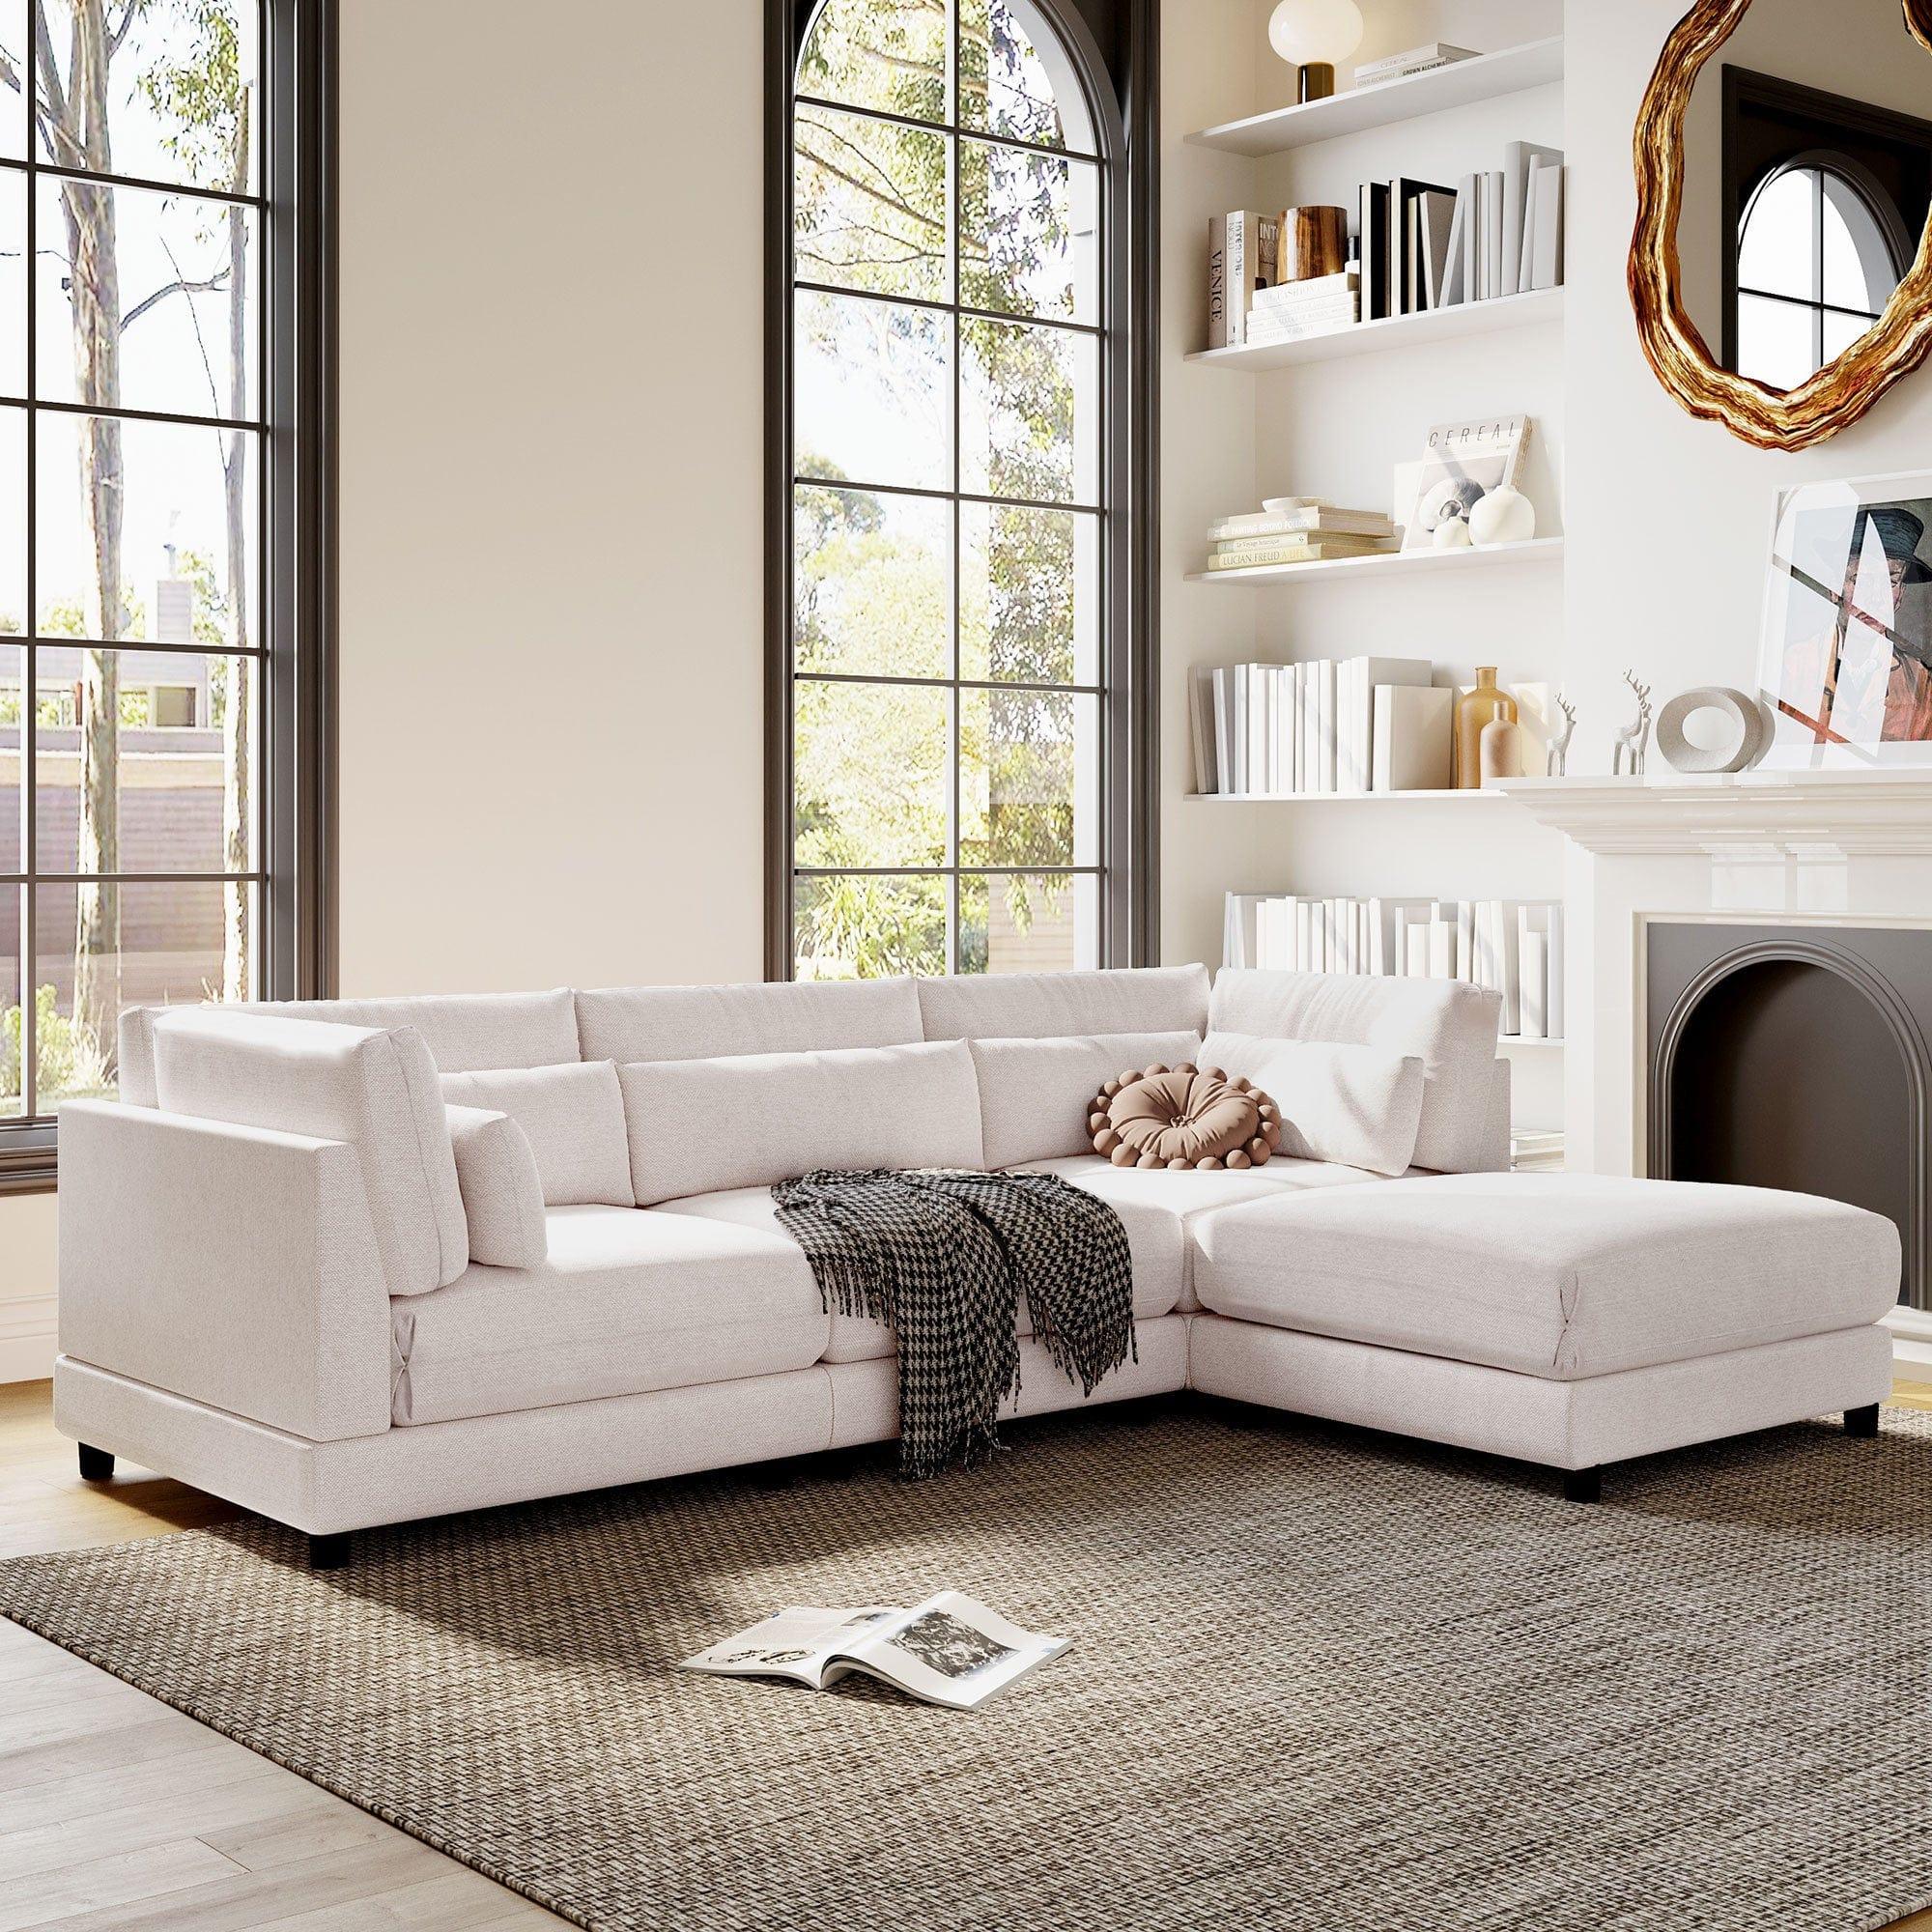 Shop U_STYLE 2 Pieces L shaped Sofa with Removable Ottomans and comfortable waist pillows Mademoiselle Home Decor